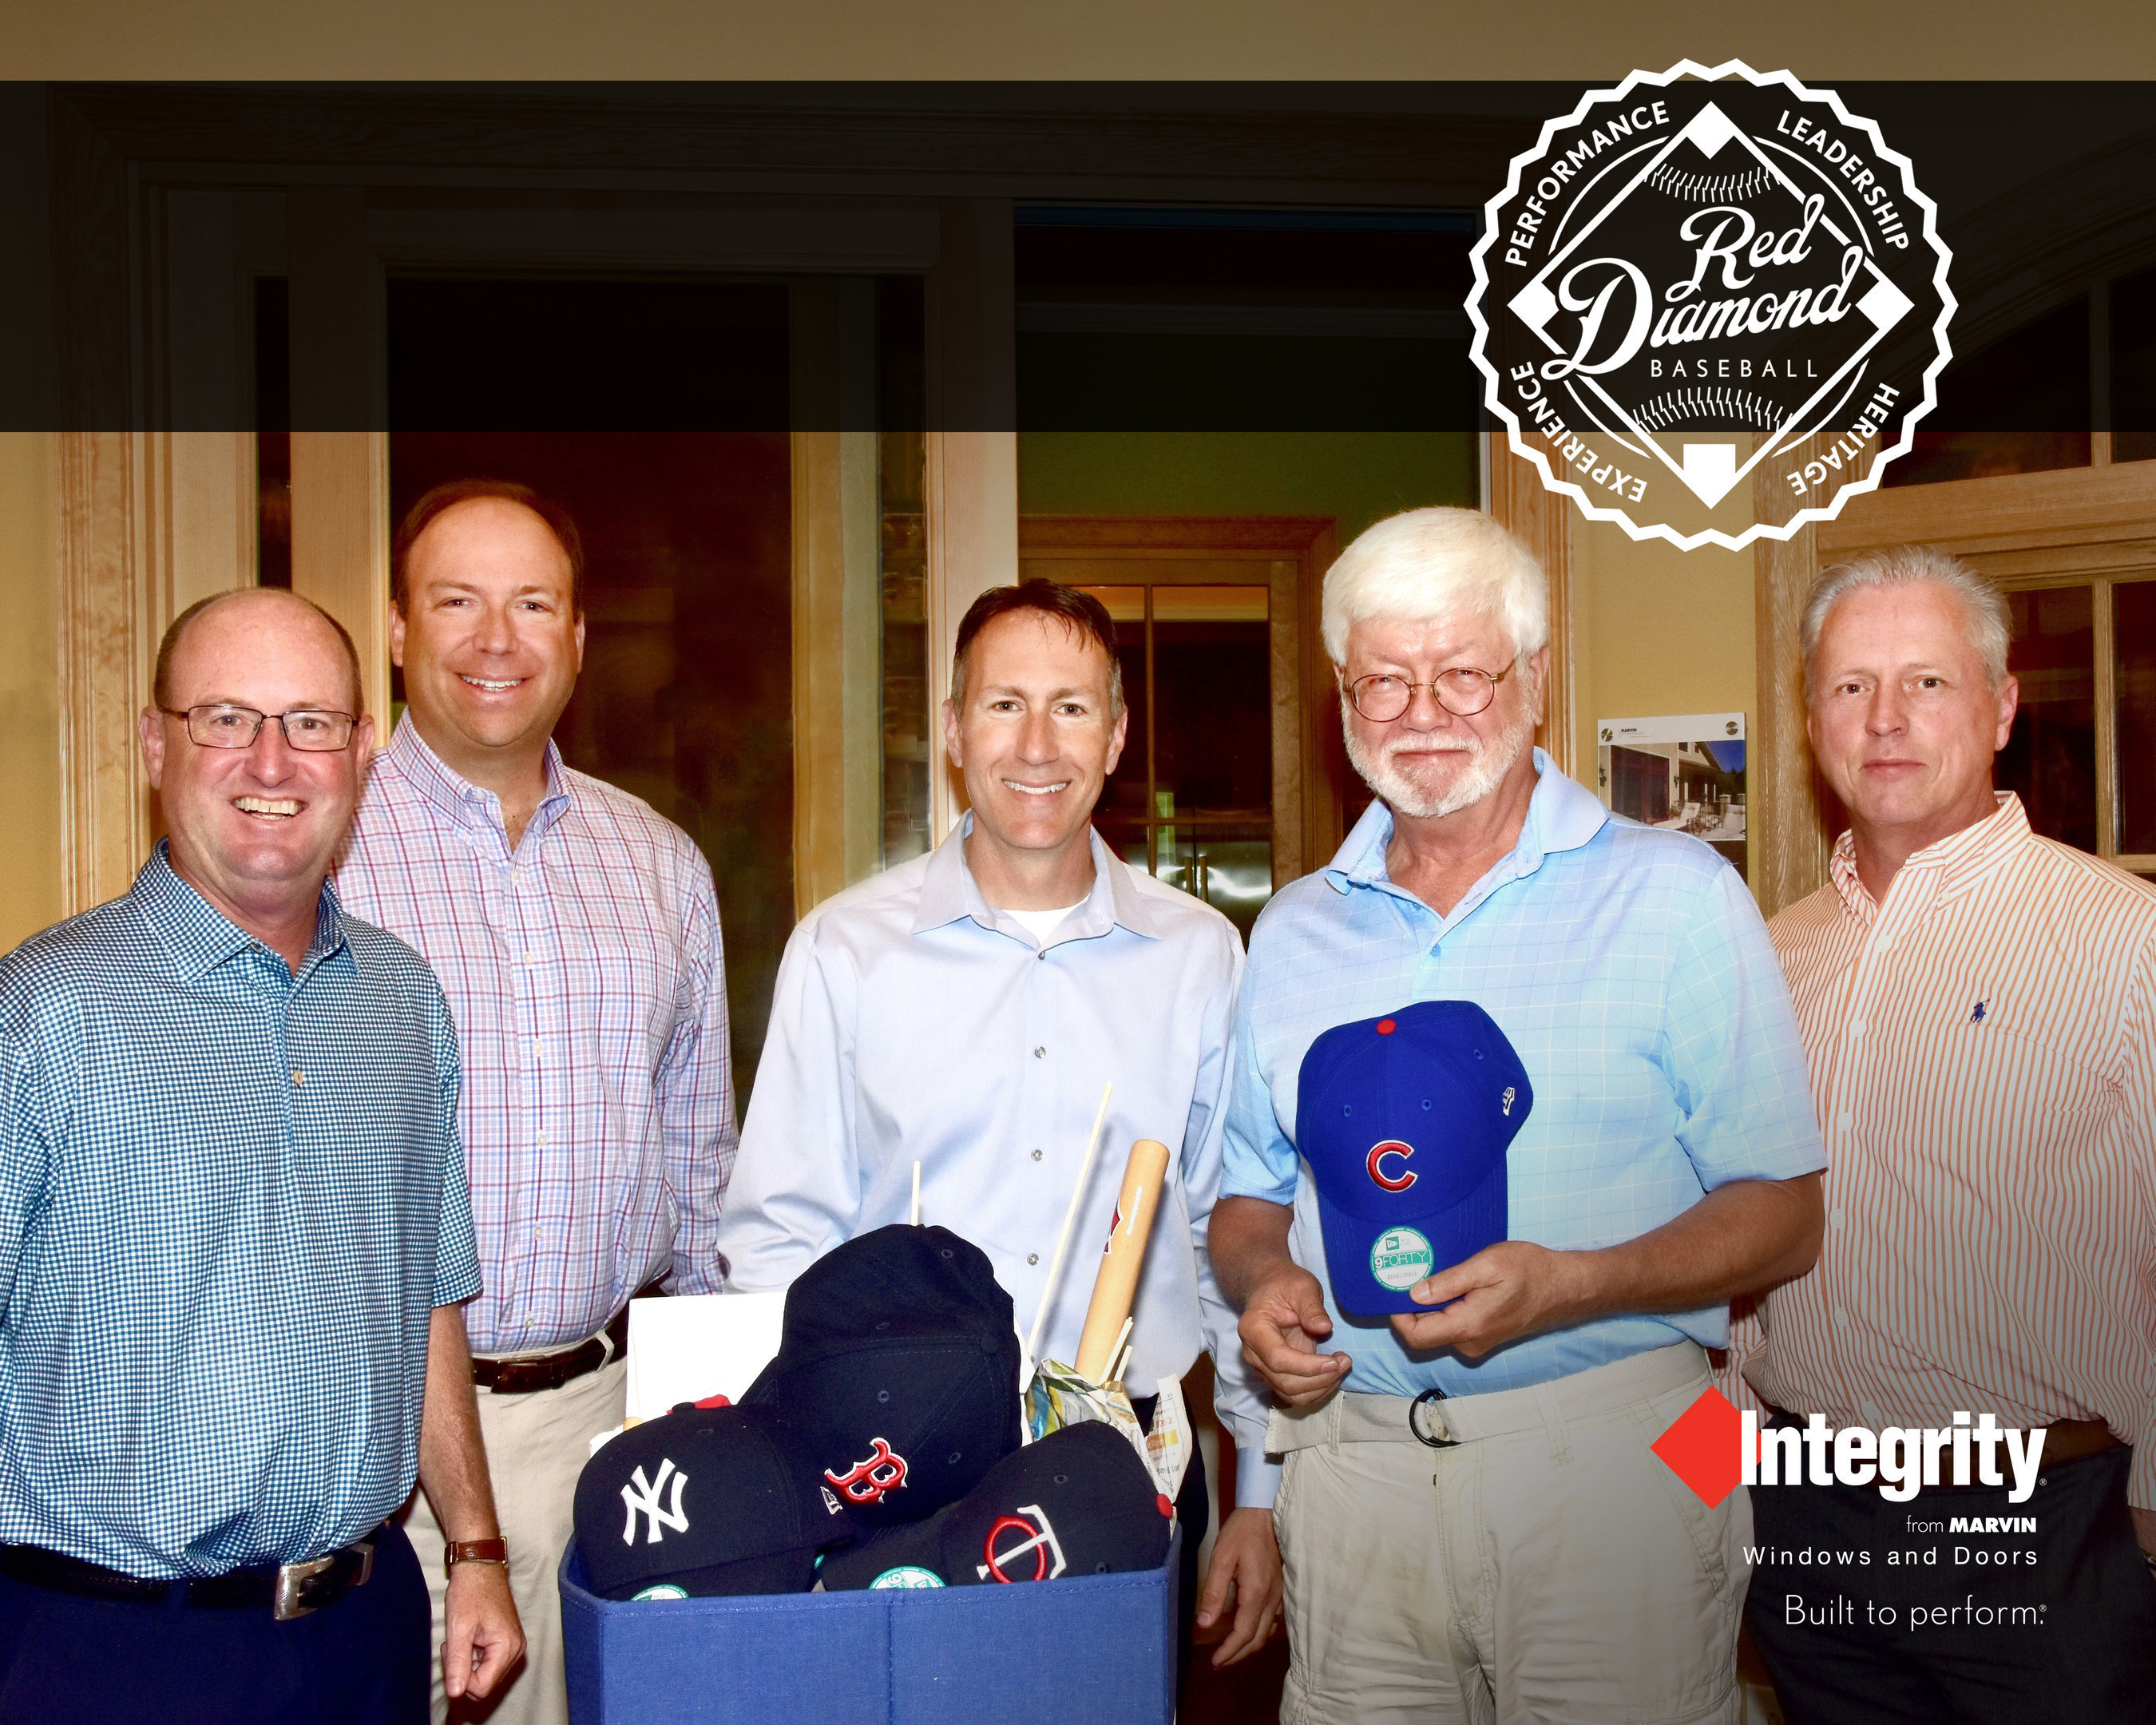 Integrity Windows and Doors Senior Territory Manager Rob Hardy, Architectural Vision Inc. President Peter Morrison, Integrity Windows and Doors Vice President of Sales Todd Antonelli, Red Diamond Baseball winner Dennis McConnell and Architectural Vision Inc. Sales Representative Mark Van Tillburg celebrate McConnell's win in Atlanta, Ga. with a bundle of baseball apparel and game-day essentials.